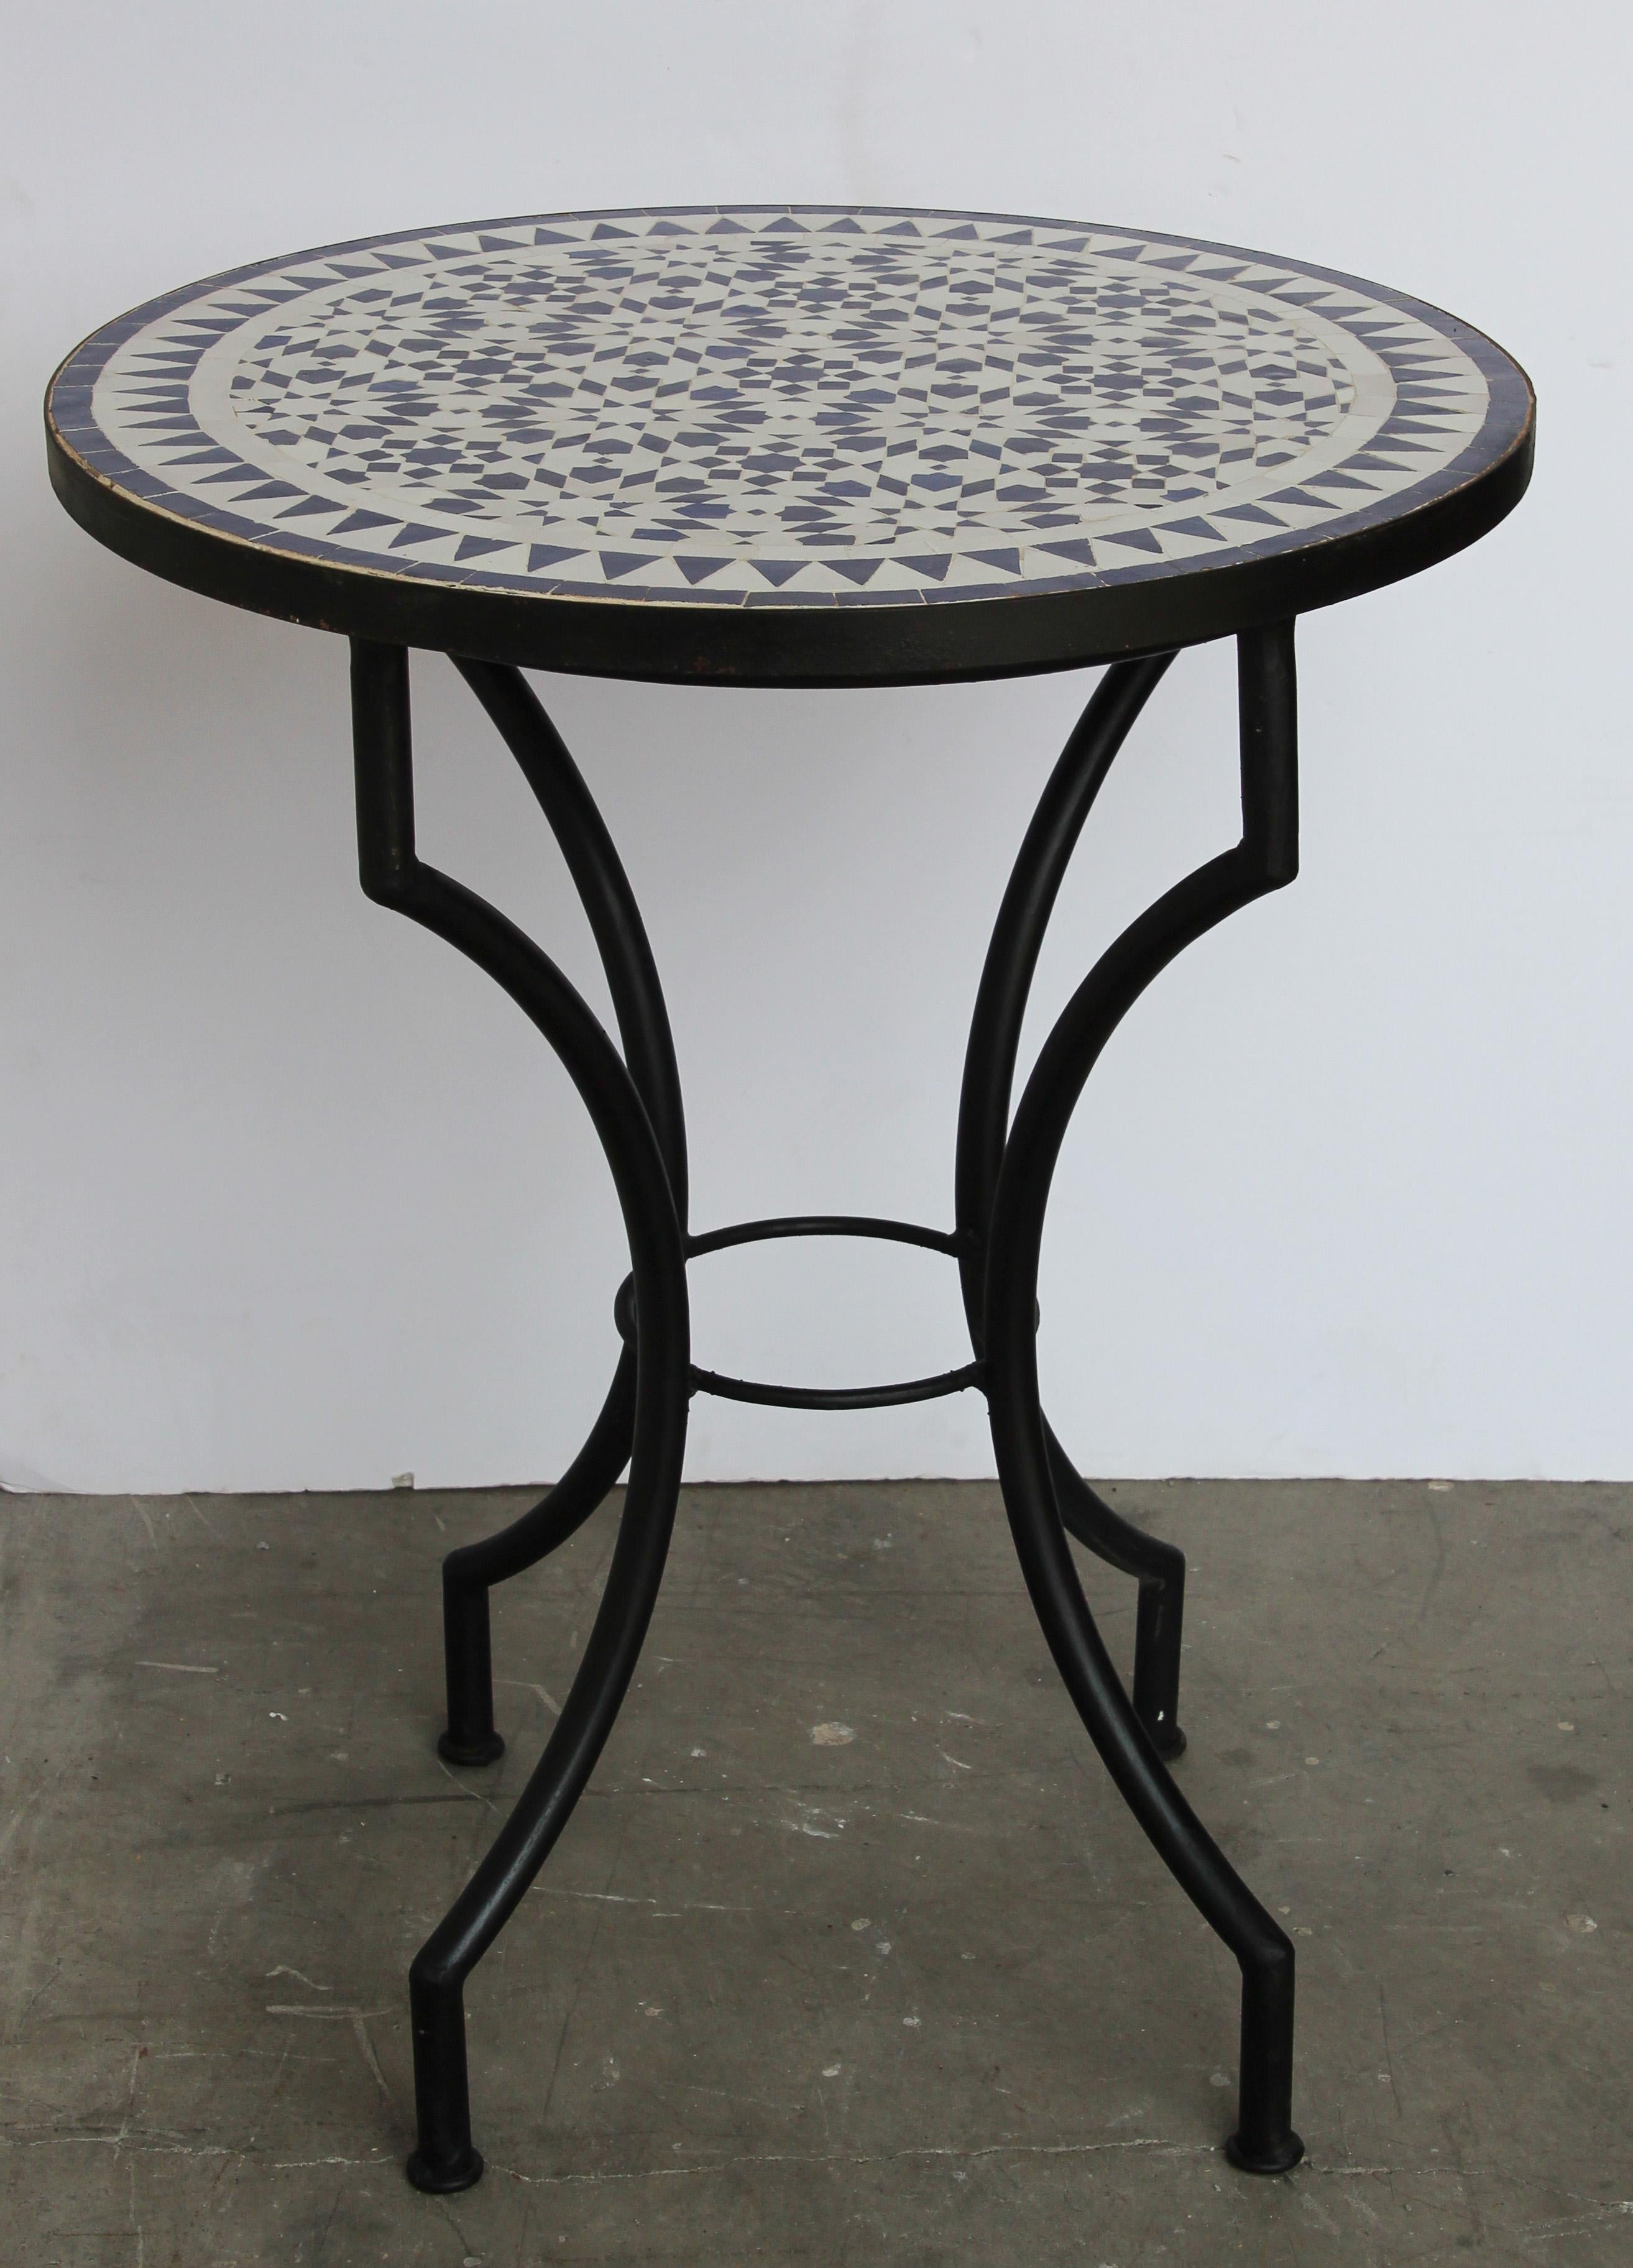 Moroccan Fez Mosaic Blue and White Tiles Bistro Table 5